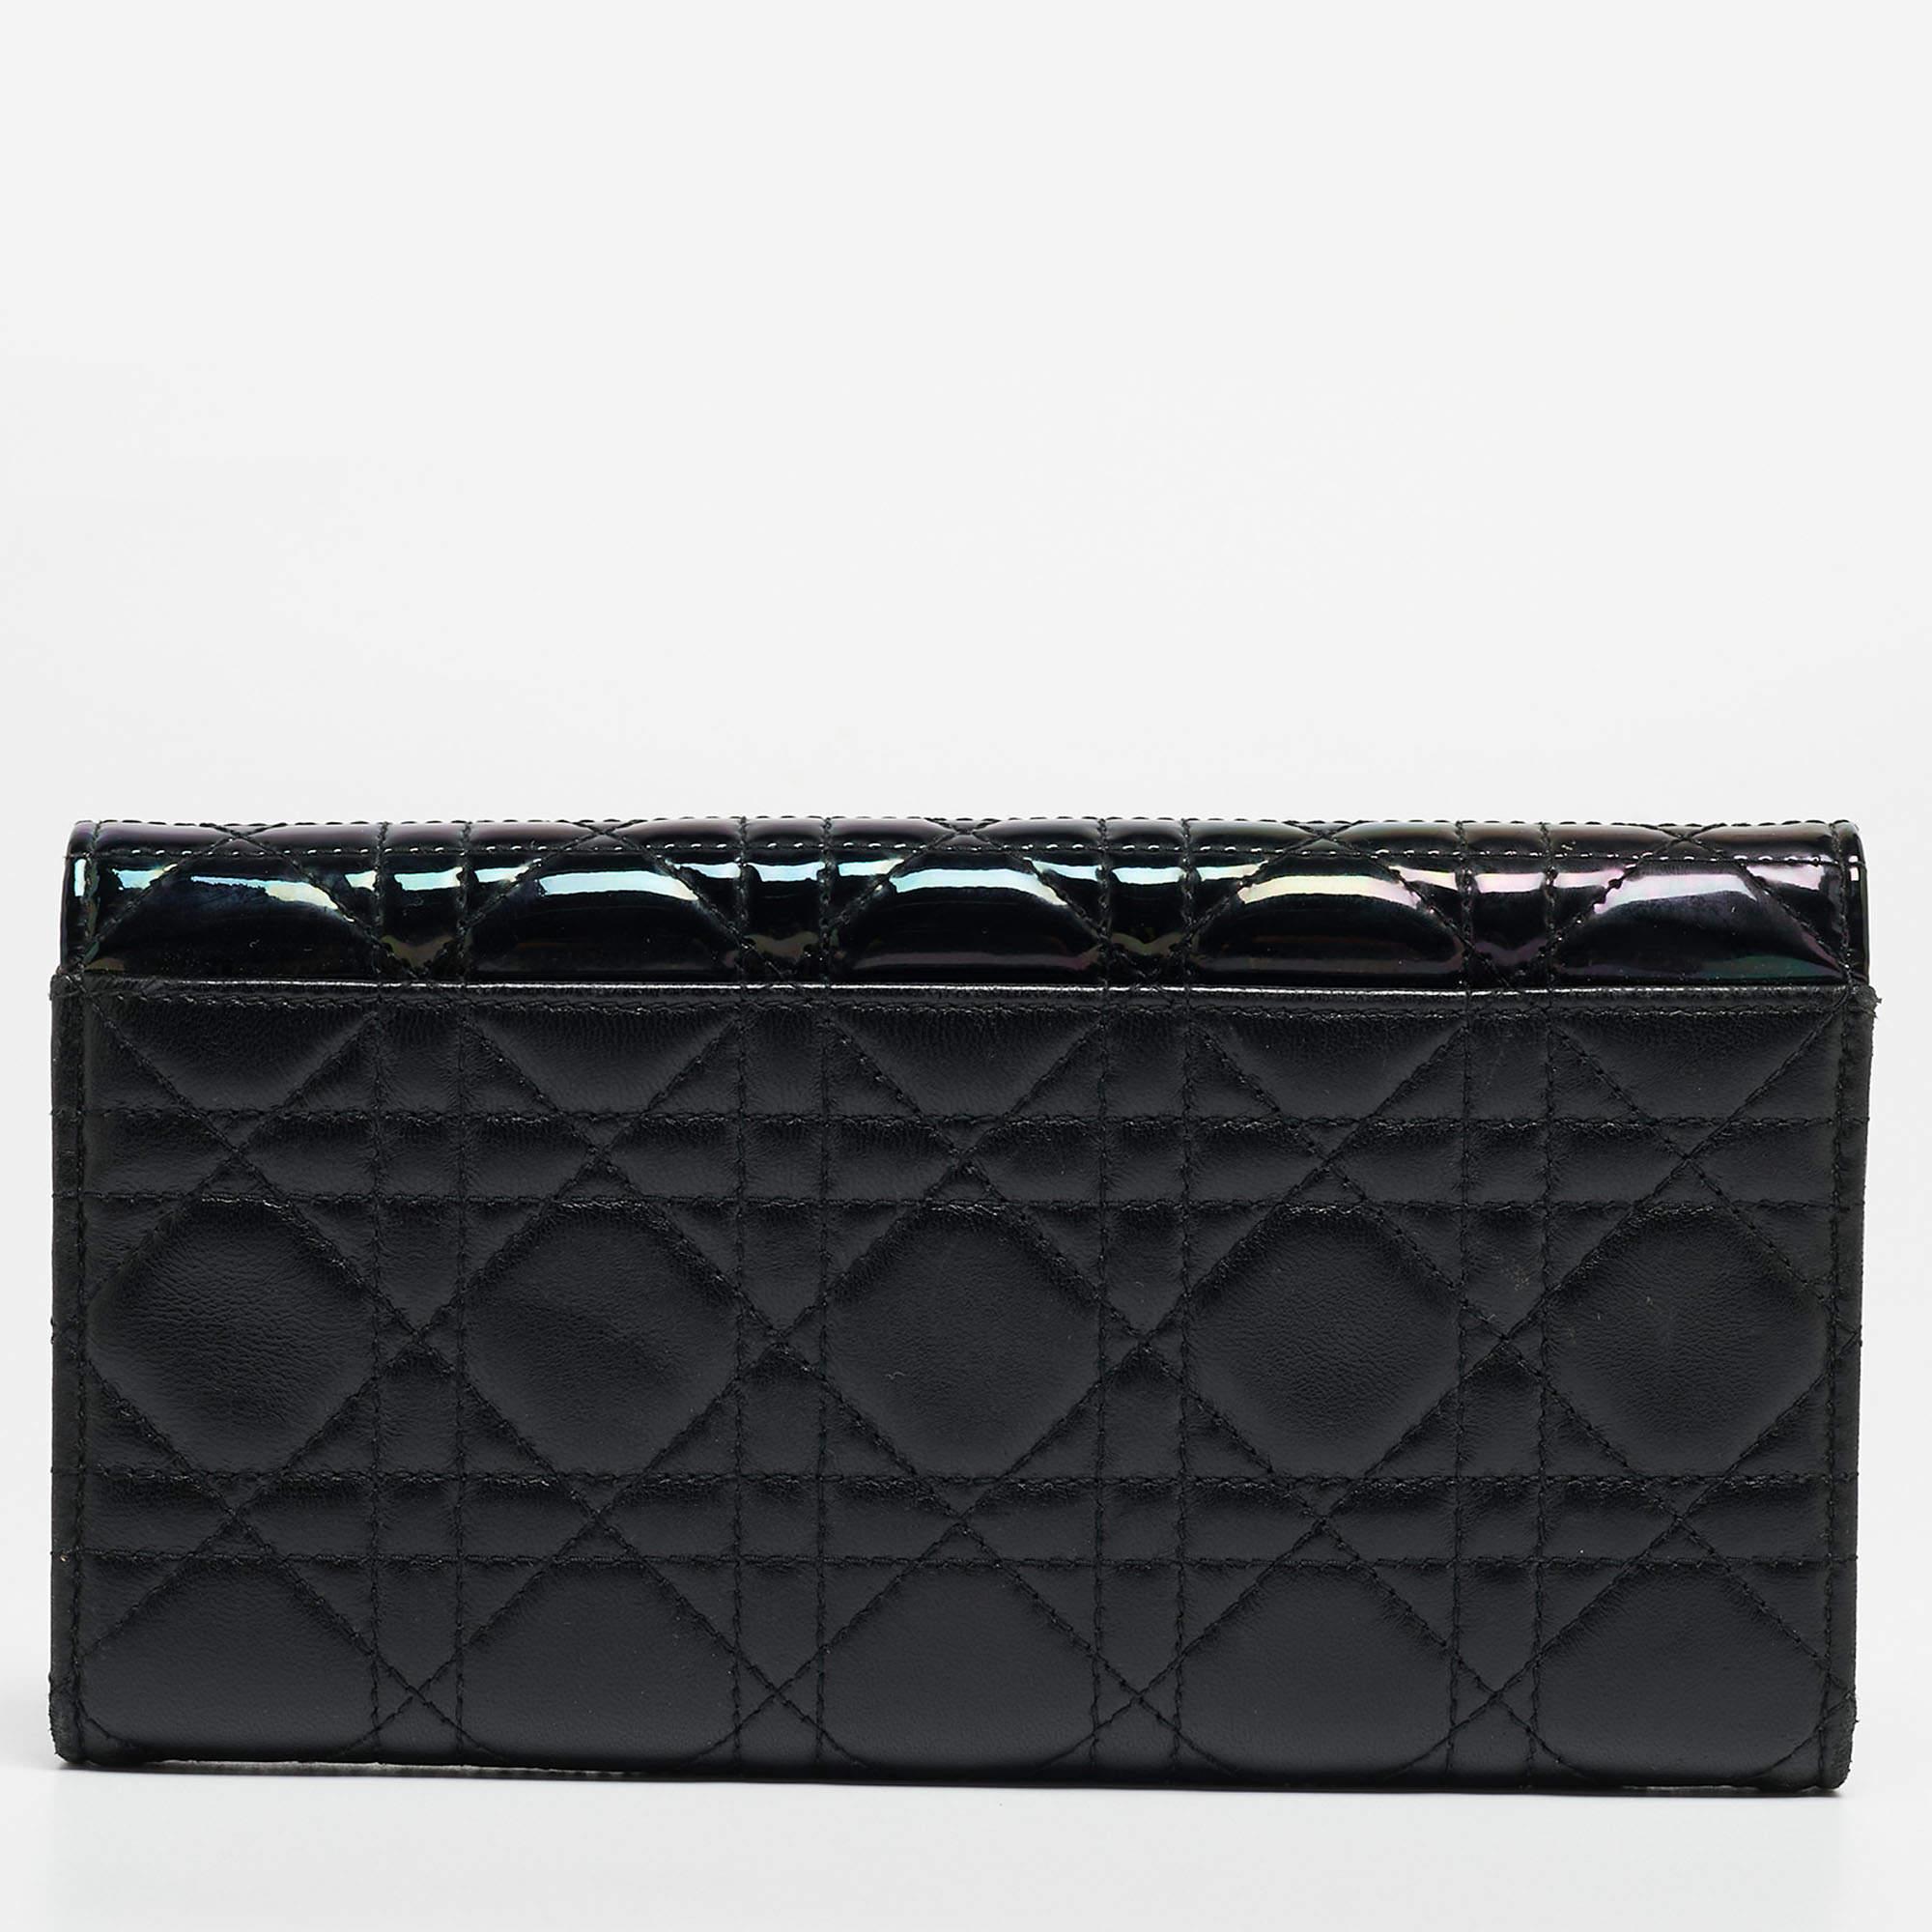 This Dior wallet is an immaculate balance of sophistication and rational utility. It has been designed using prime quality materials and elevated by a sleek finish. The creation is equipped with ample space for your monetary essentials.

